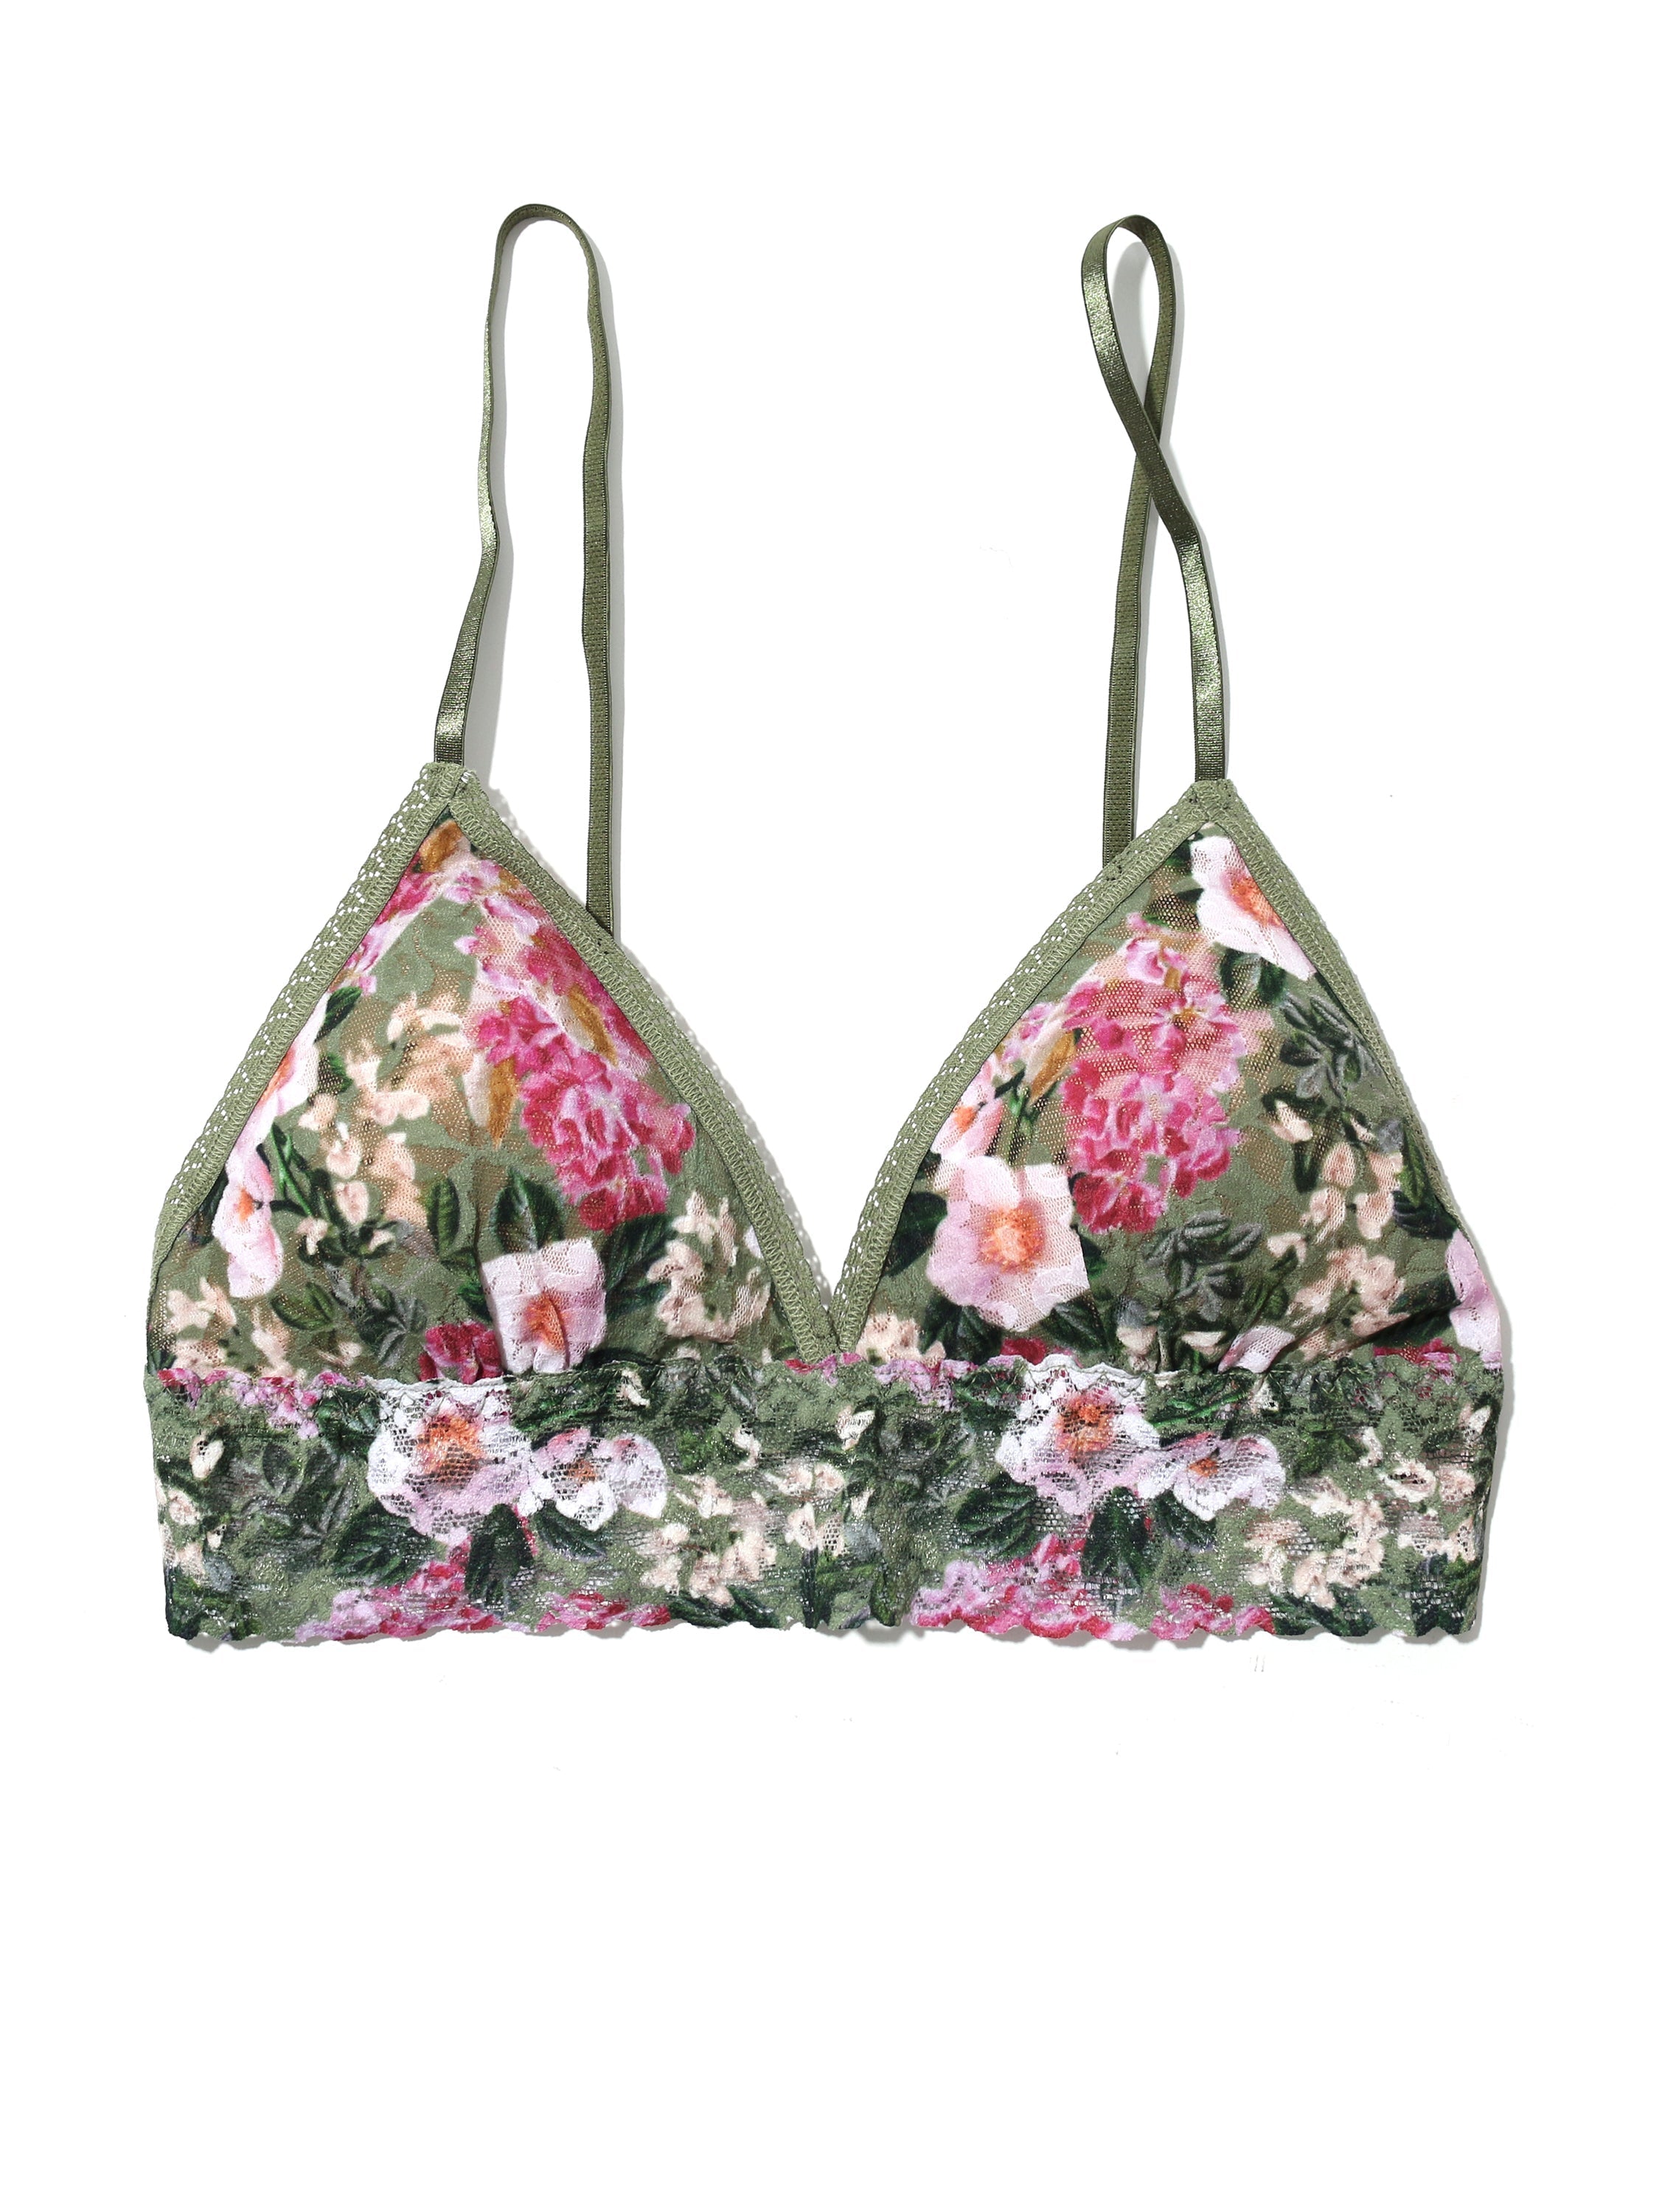 Triangle Bra Bralette Made of Vintage White Cotton With Hand Embroidered  Birds Flowers and Vintage Floral Feed Sack Fabric Sz S/32 to 36 